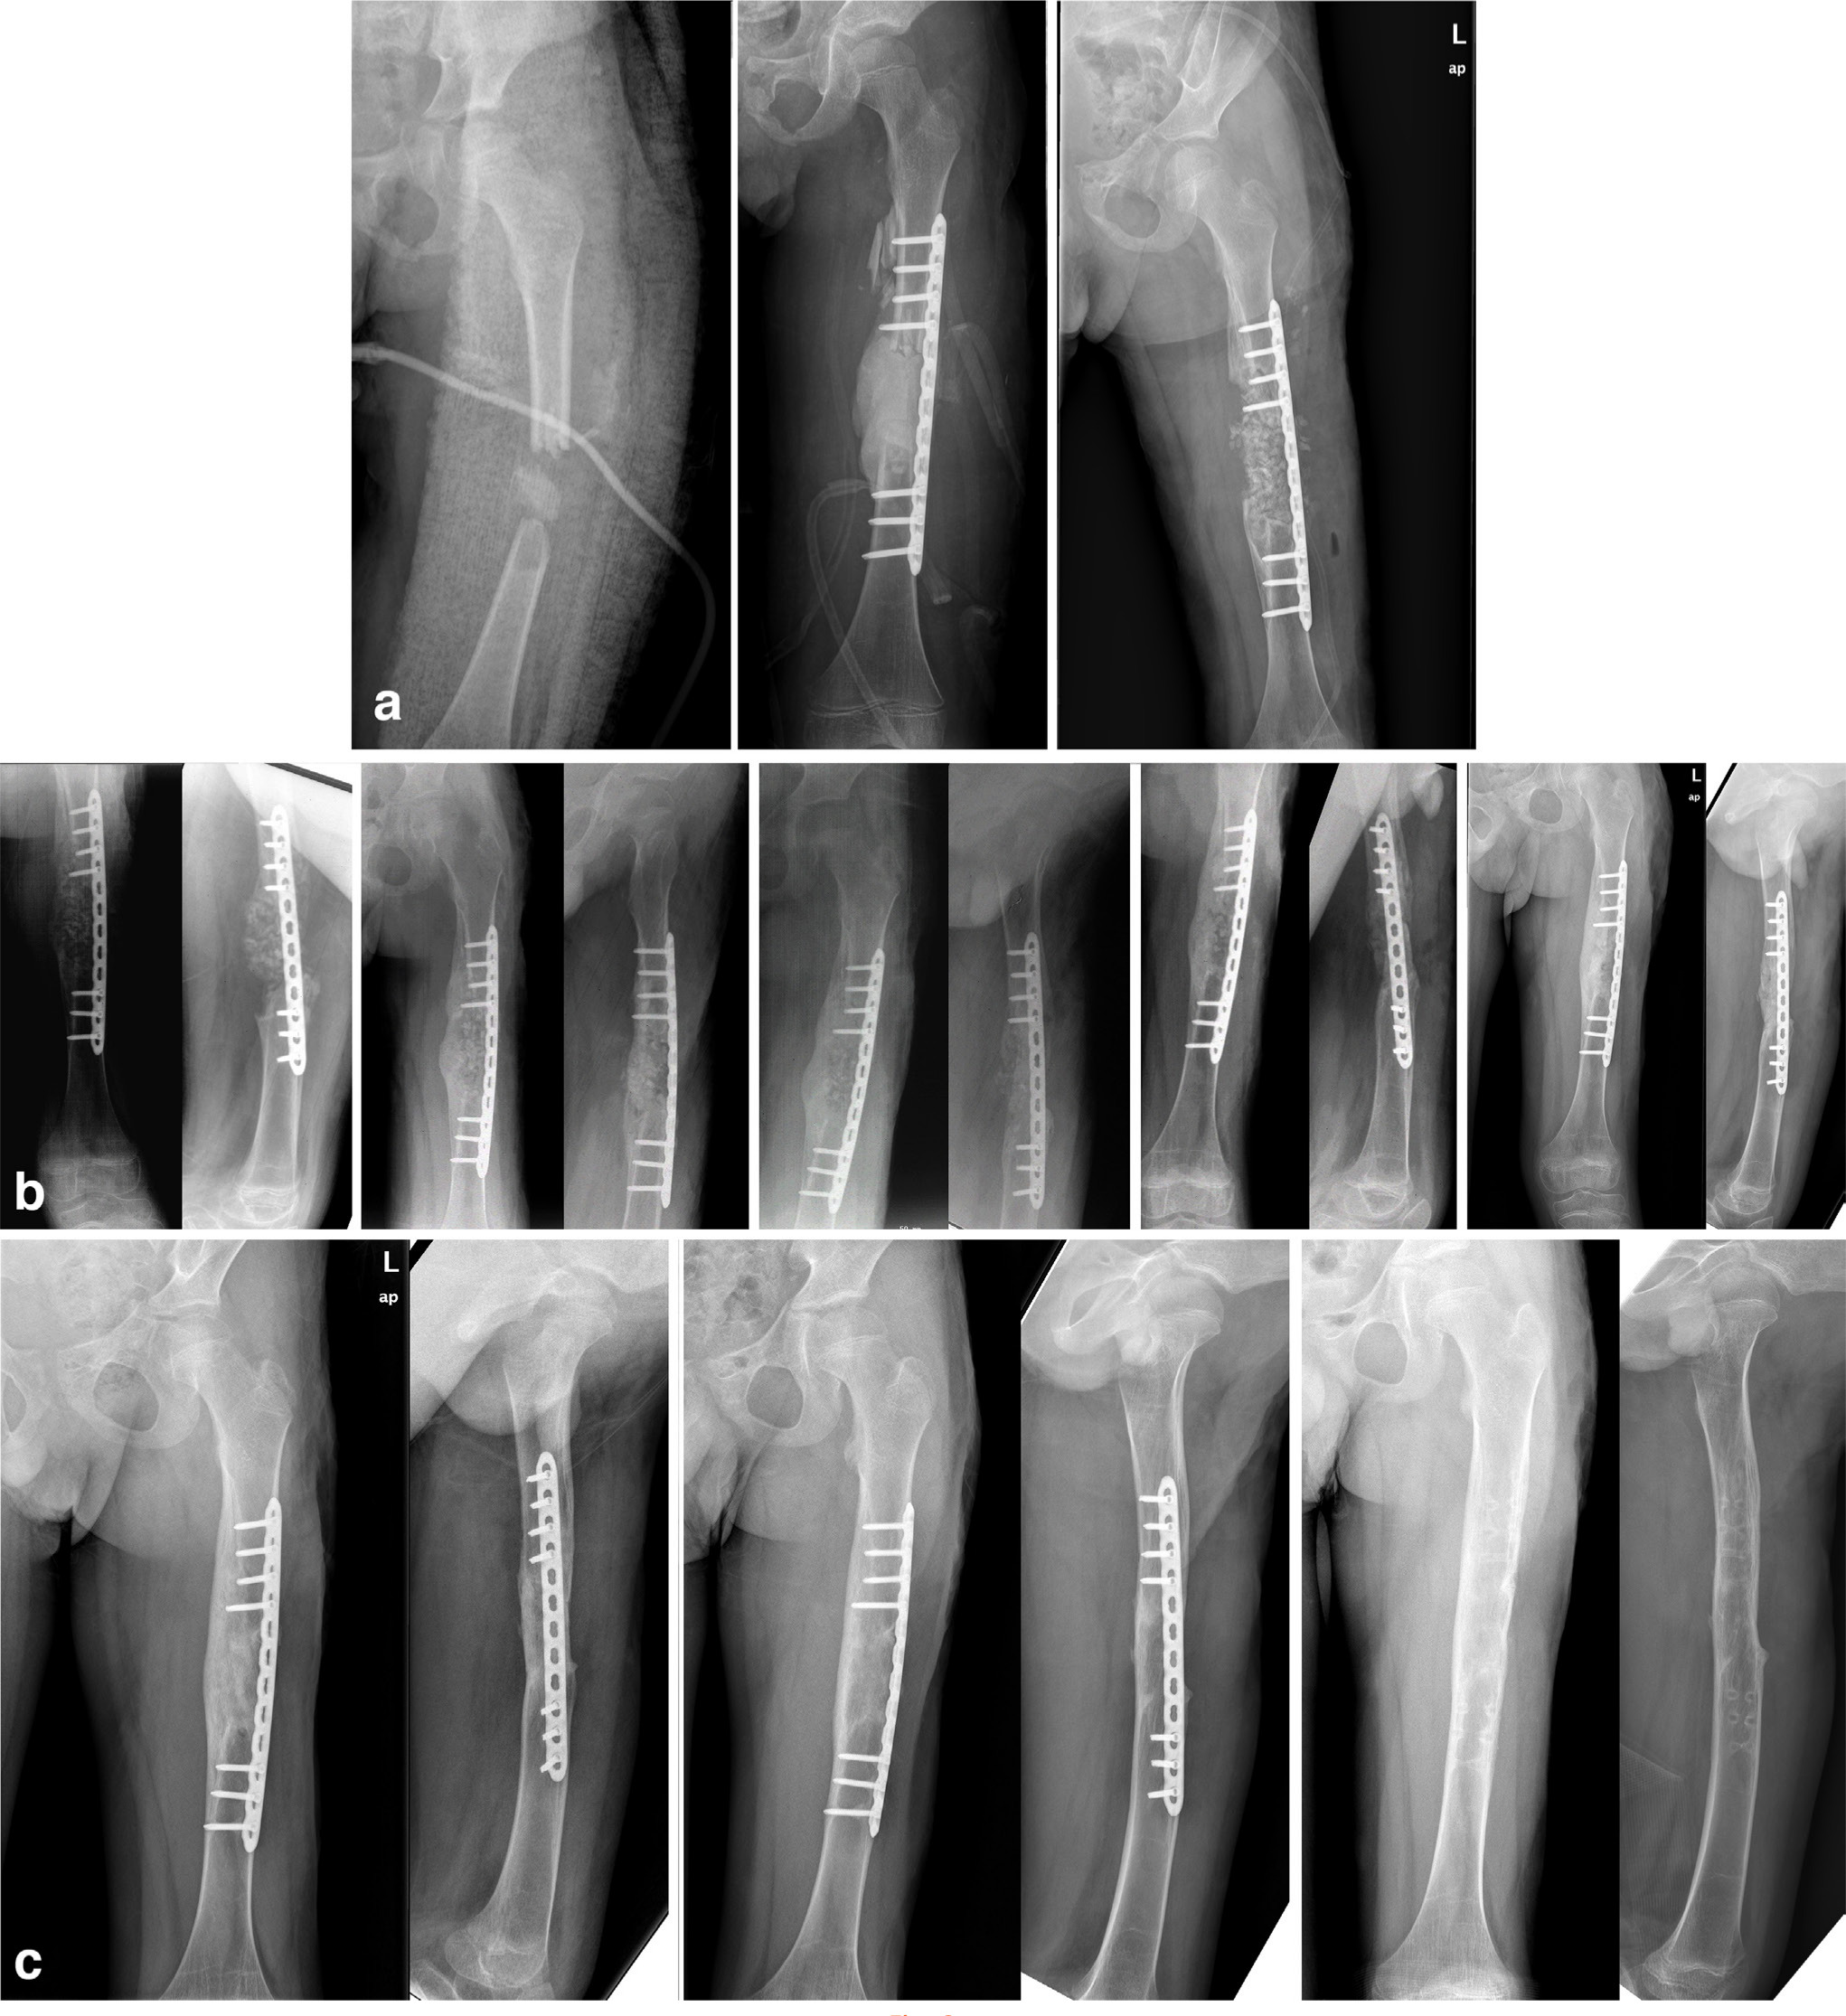 Fig. 3 
          Radiographs demonstrating the healing process of an eight-year-old male patient with a bone volume defect of 45 ml in Group BMCA. a) Anteroposterior (AP) radiographs before first operation, after first operation, and after second operation. b) AP and lateral radiographs from 1, 2, 3, 4, and 6 months postoperatively, demonstrating bony consolidation in the fourth month. c) AP and lateral radiographs from 1, 2, and 3 years postoperatively. BMCA, bone marrow concentrator modified allograft.
        